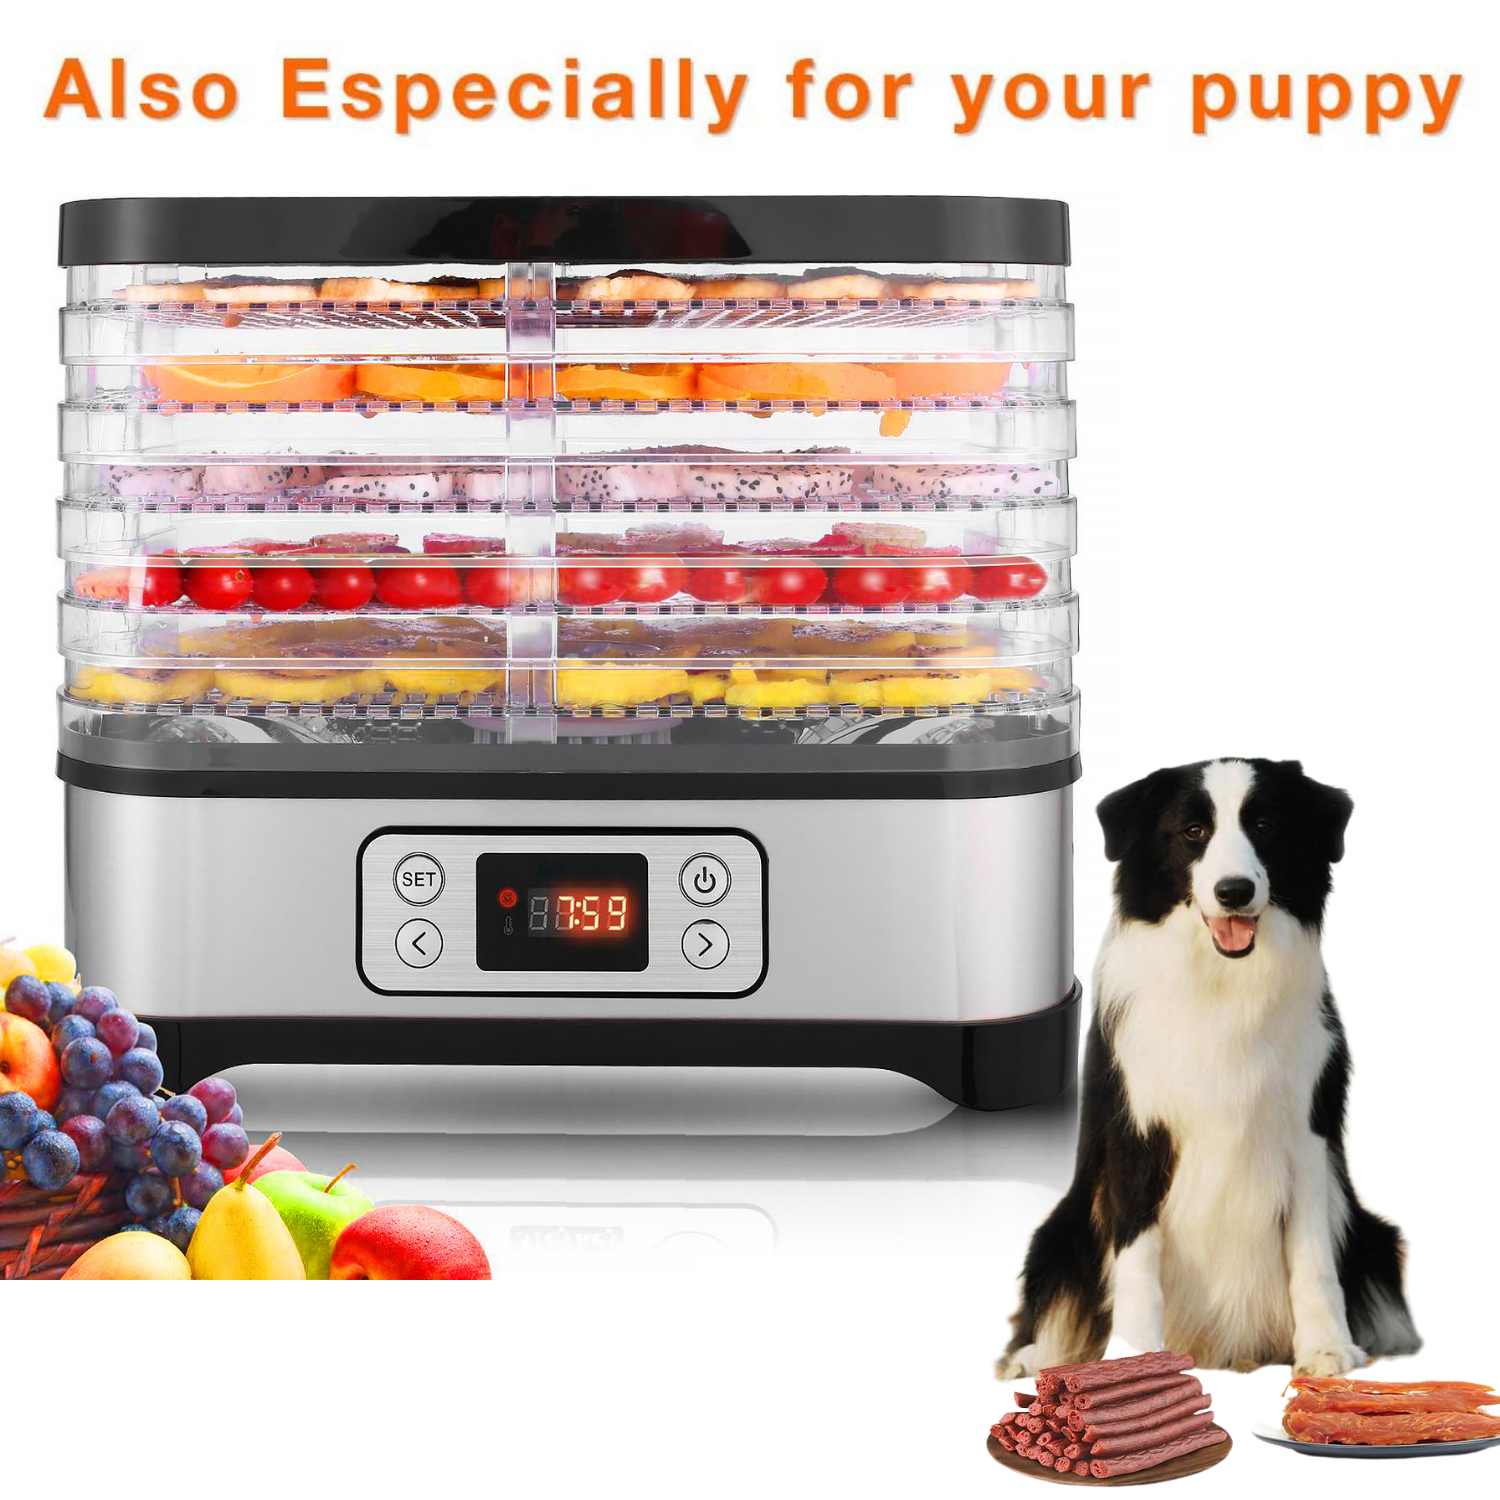 Zz Pro Commercial Stainless Steel Electric Food Dehydrator Machine, Meat or  Beef Maker, Fruit Dryer with 10 Trays, 155 Degree Fahrenheit, Jerky Safe